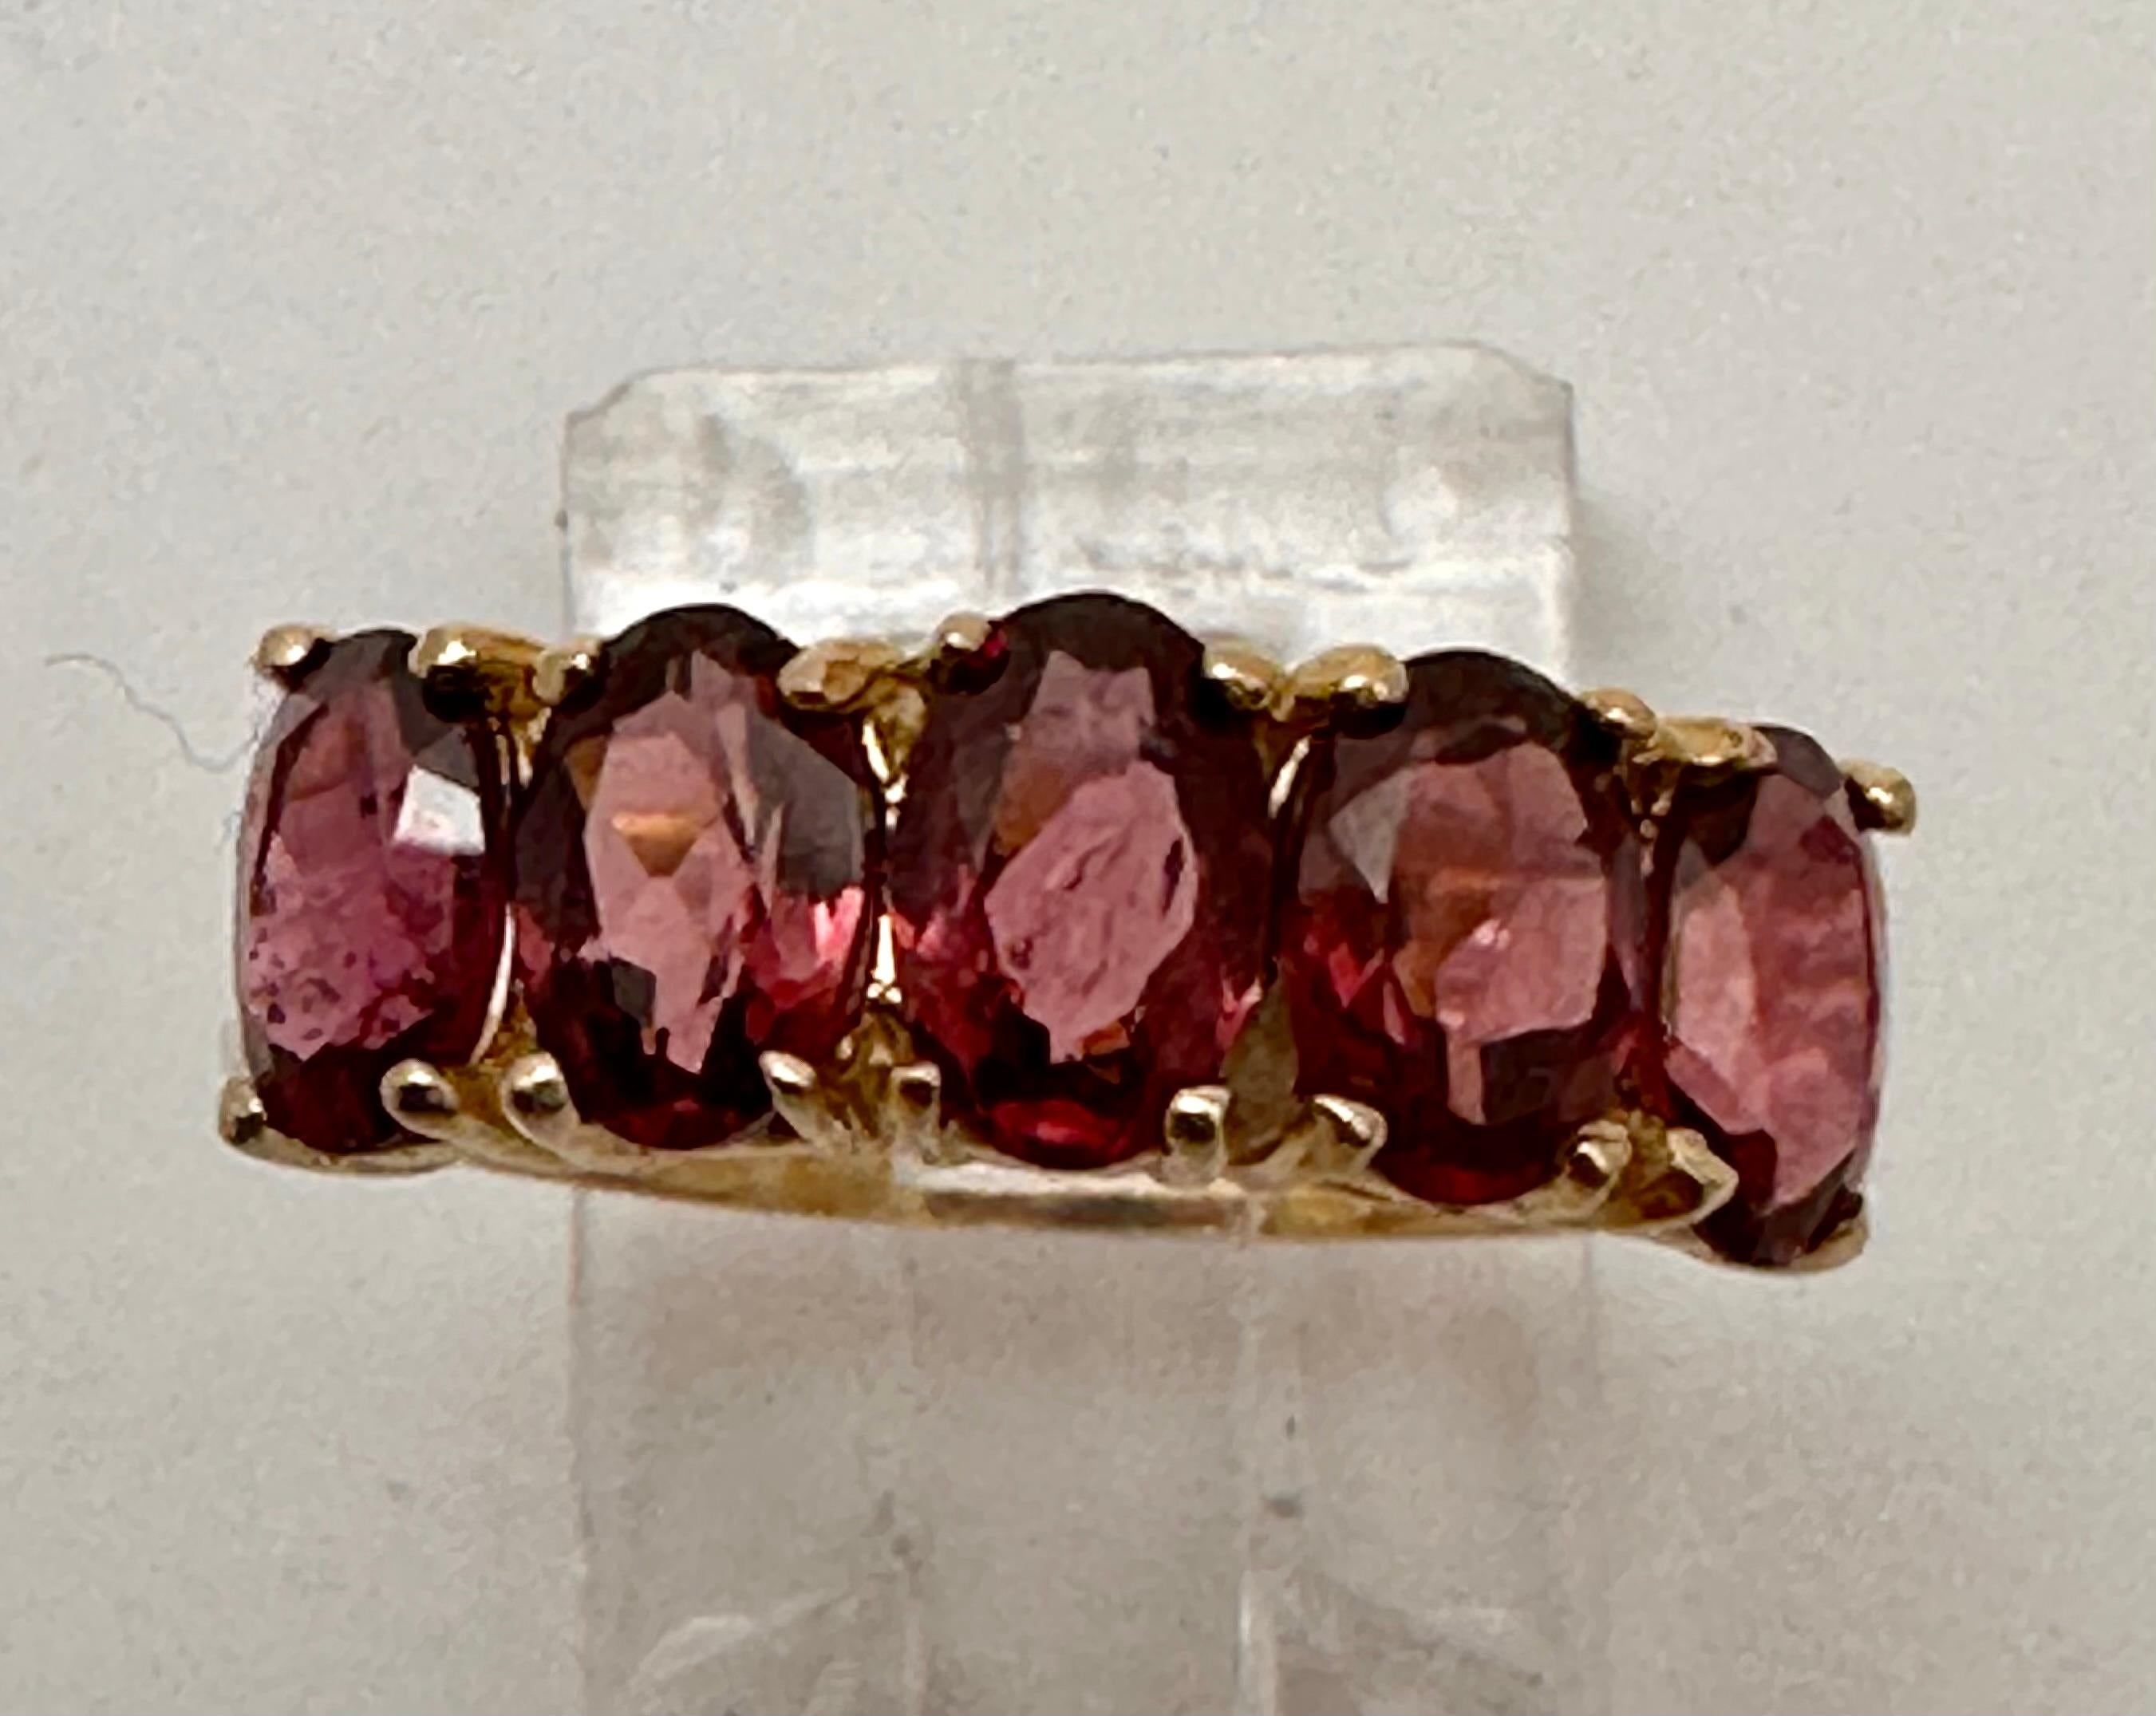 14k Yellow Gold ~ 5 ~ 4mm x 6mm Oval Shape Rubys Ring Size 7

The ruby is known as a protective stone that can bring happiness and passion into the life of the wearer. Apart from its red color, this is why the ruby makes a perfect gift for a loved